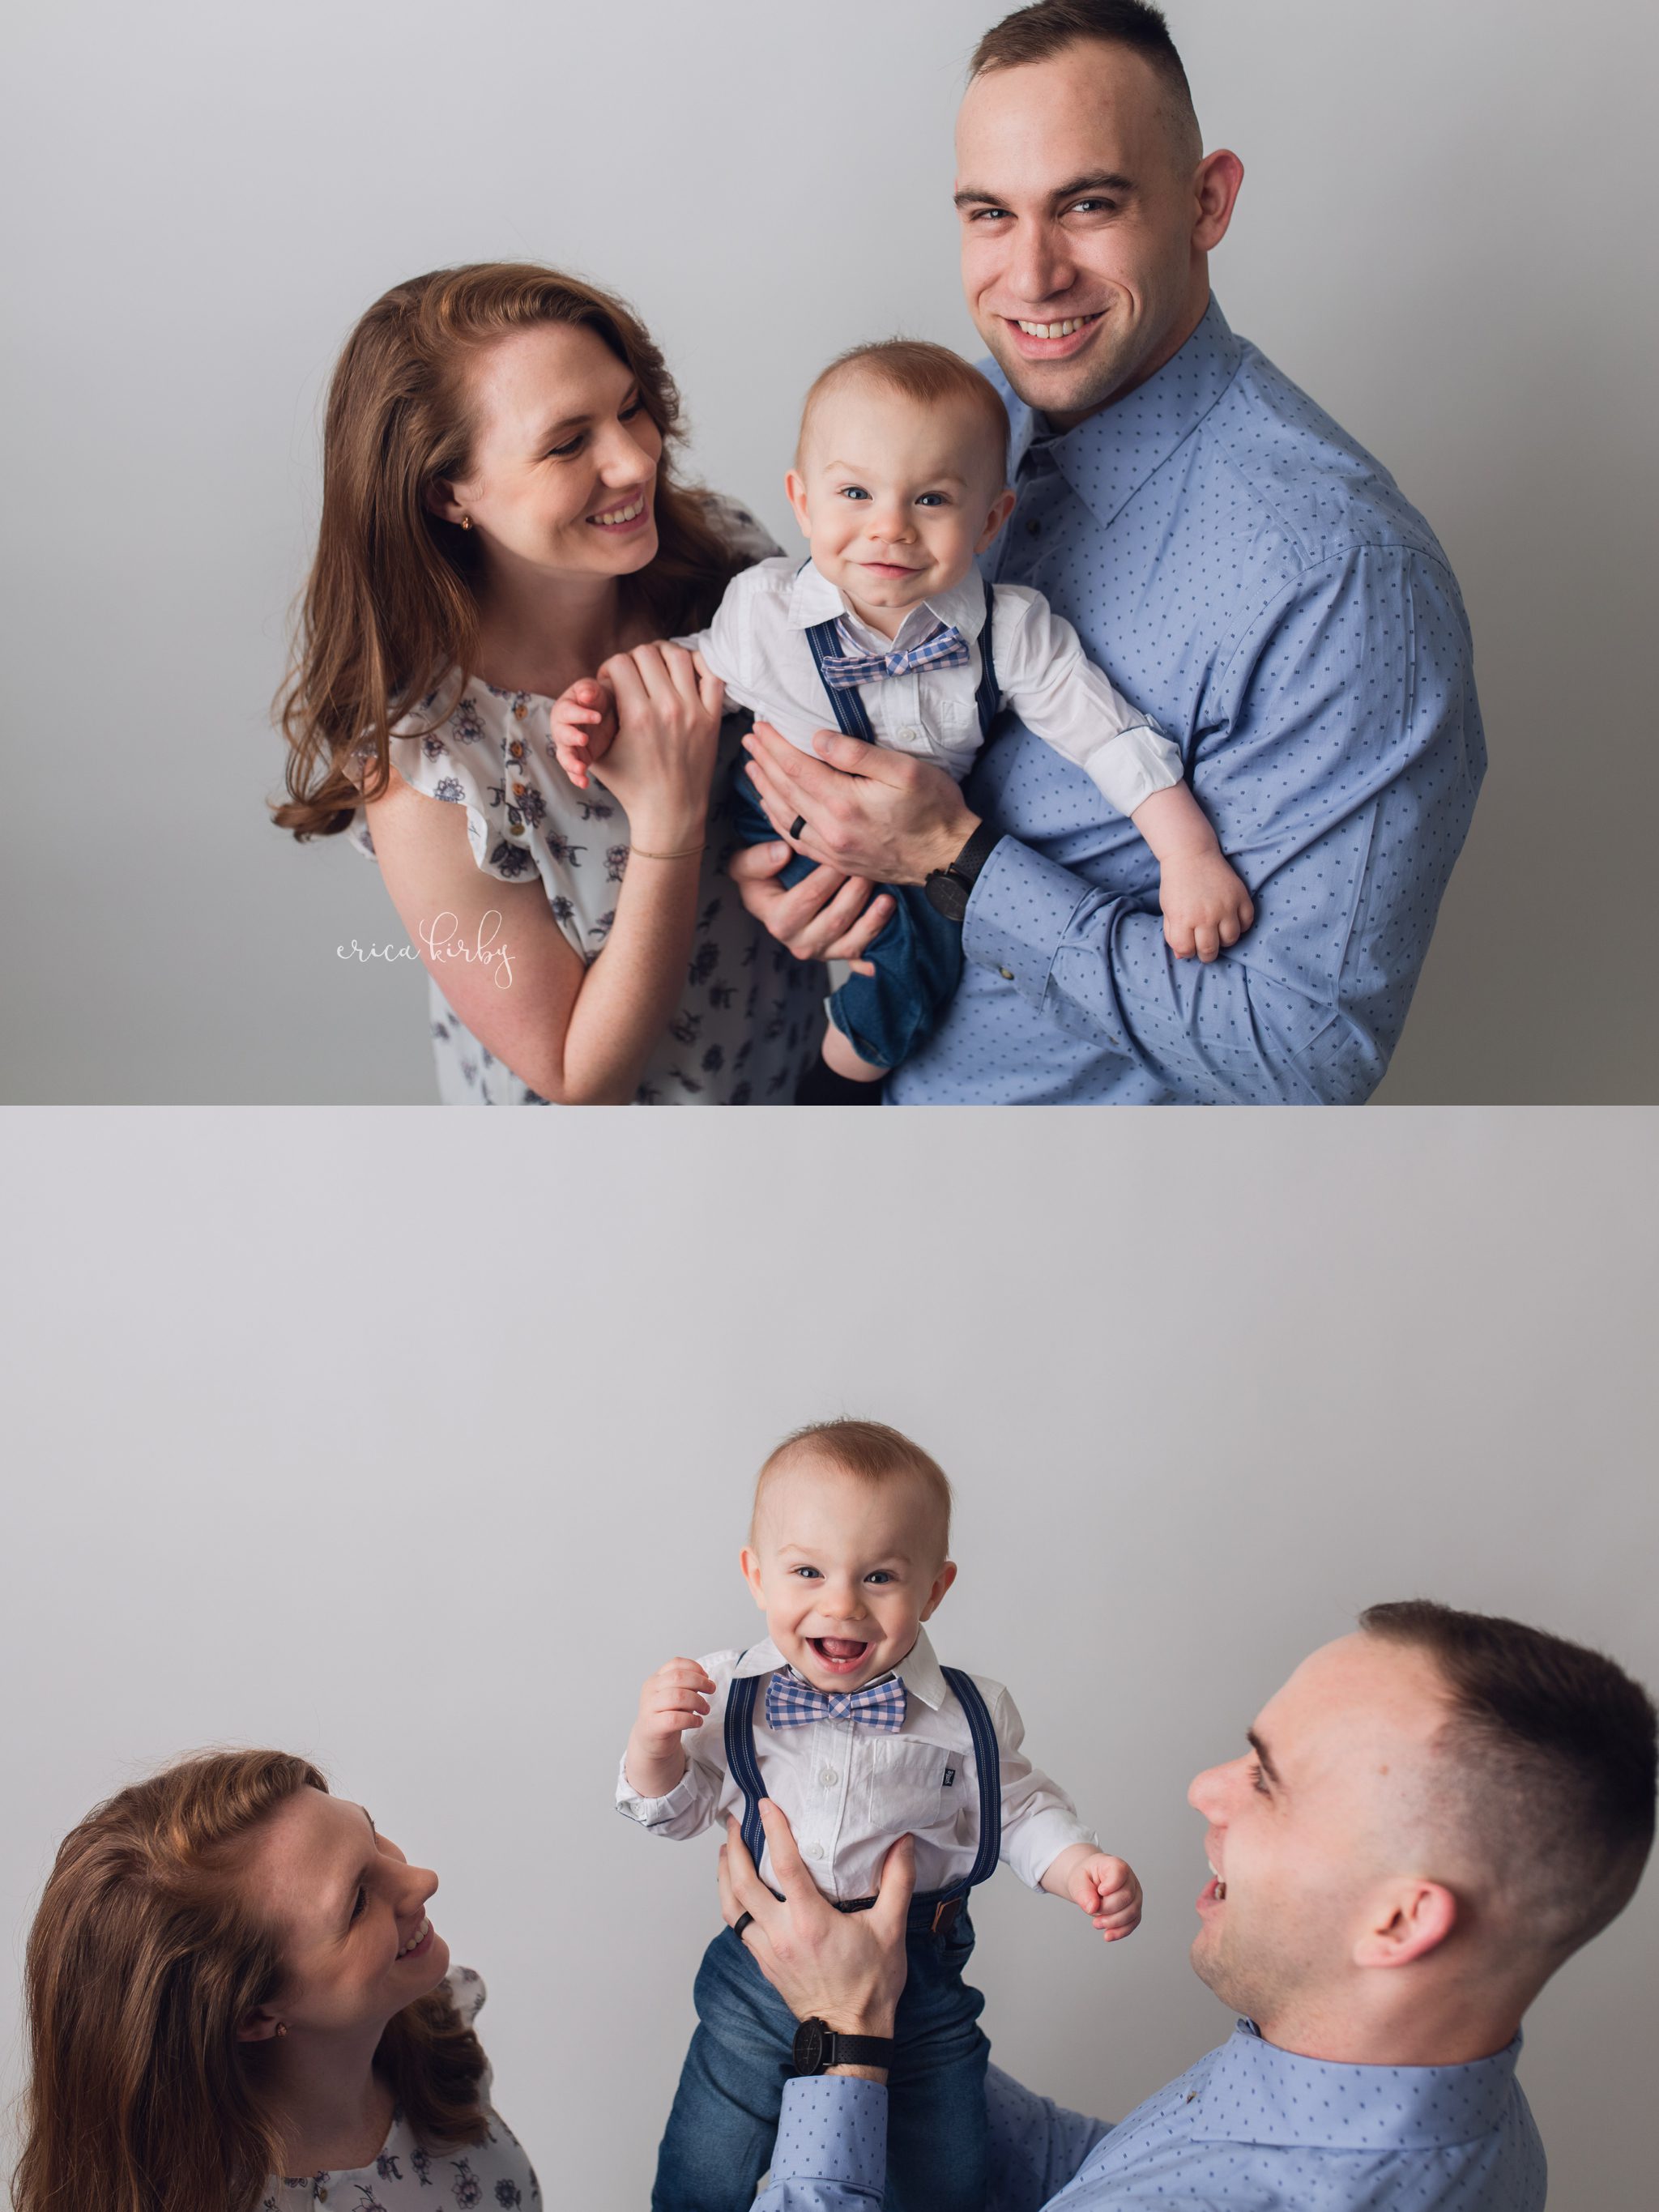 One Year Old Milestone Photographer NWA - studio family portraits for first birthday portraits - Erica Kirby Photography